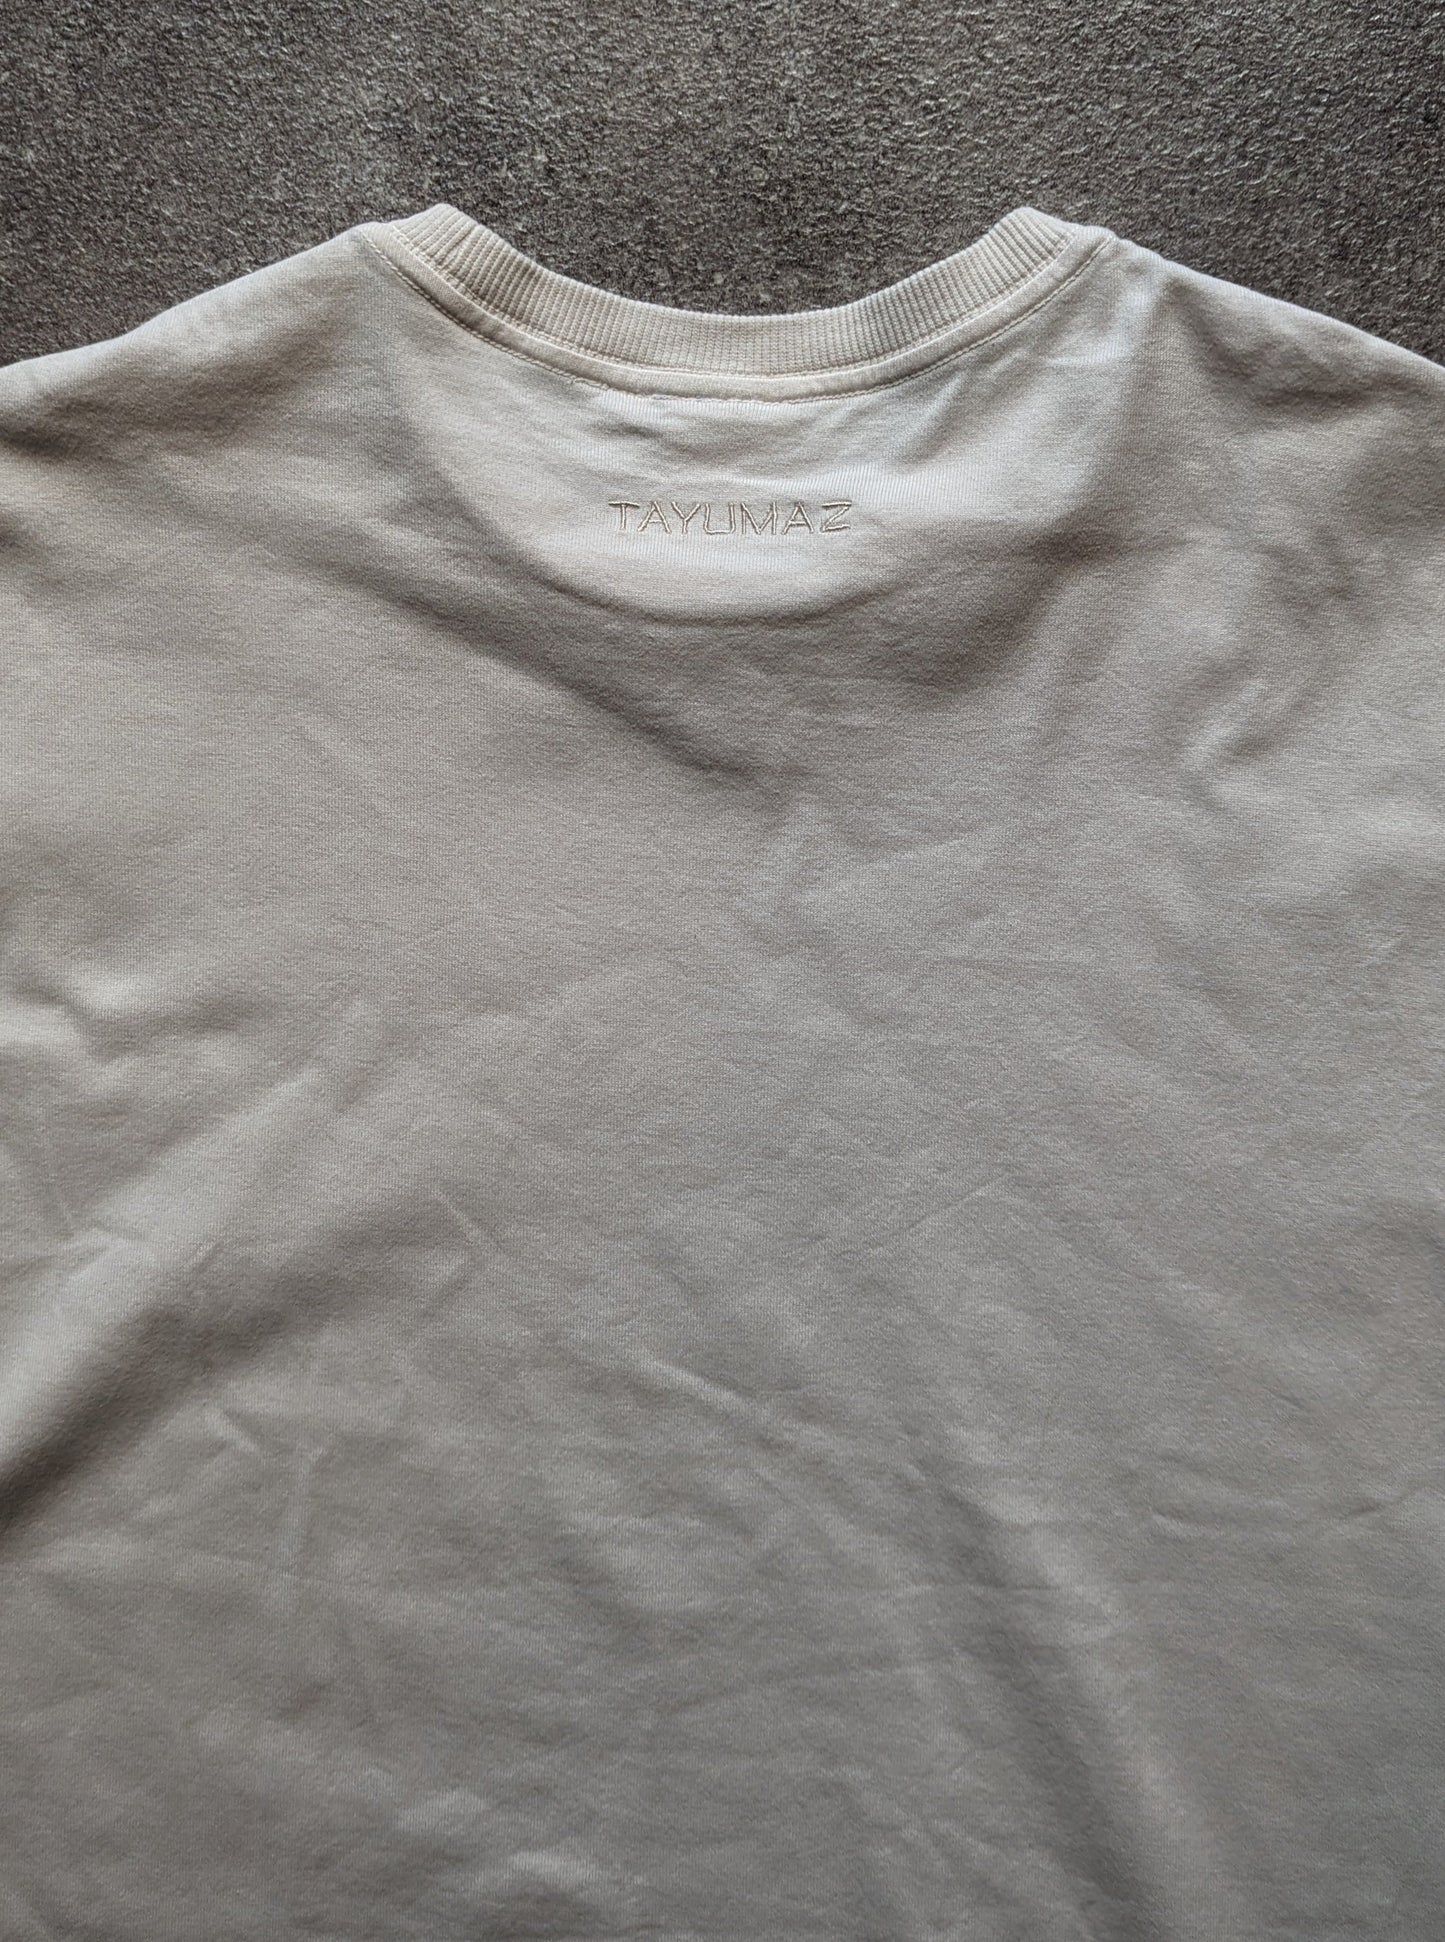 Washed cotton T-shirt in ivory white